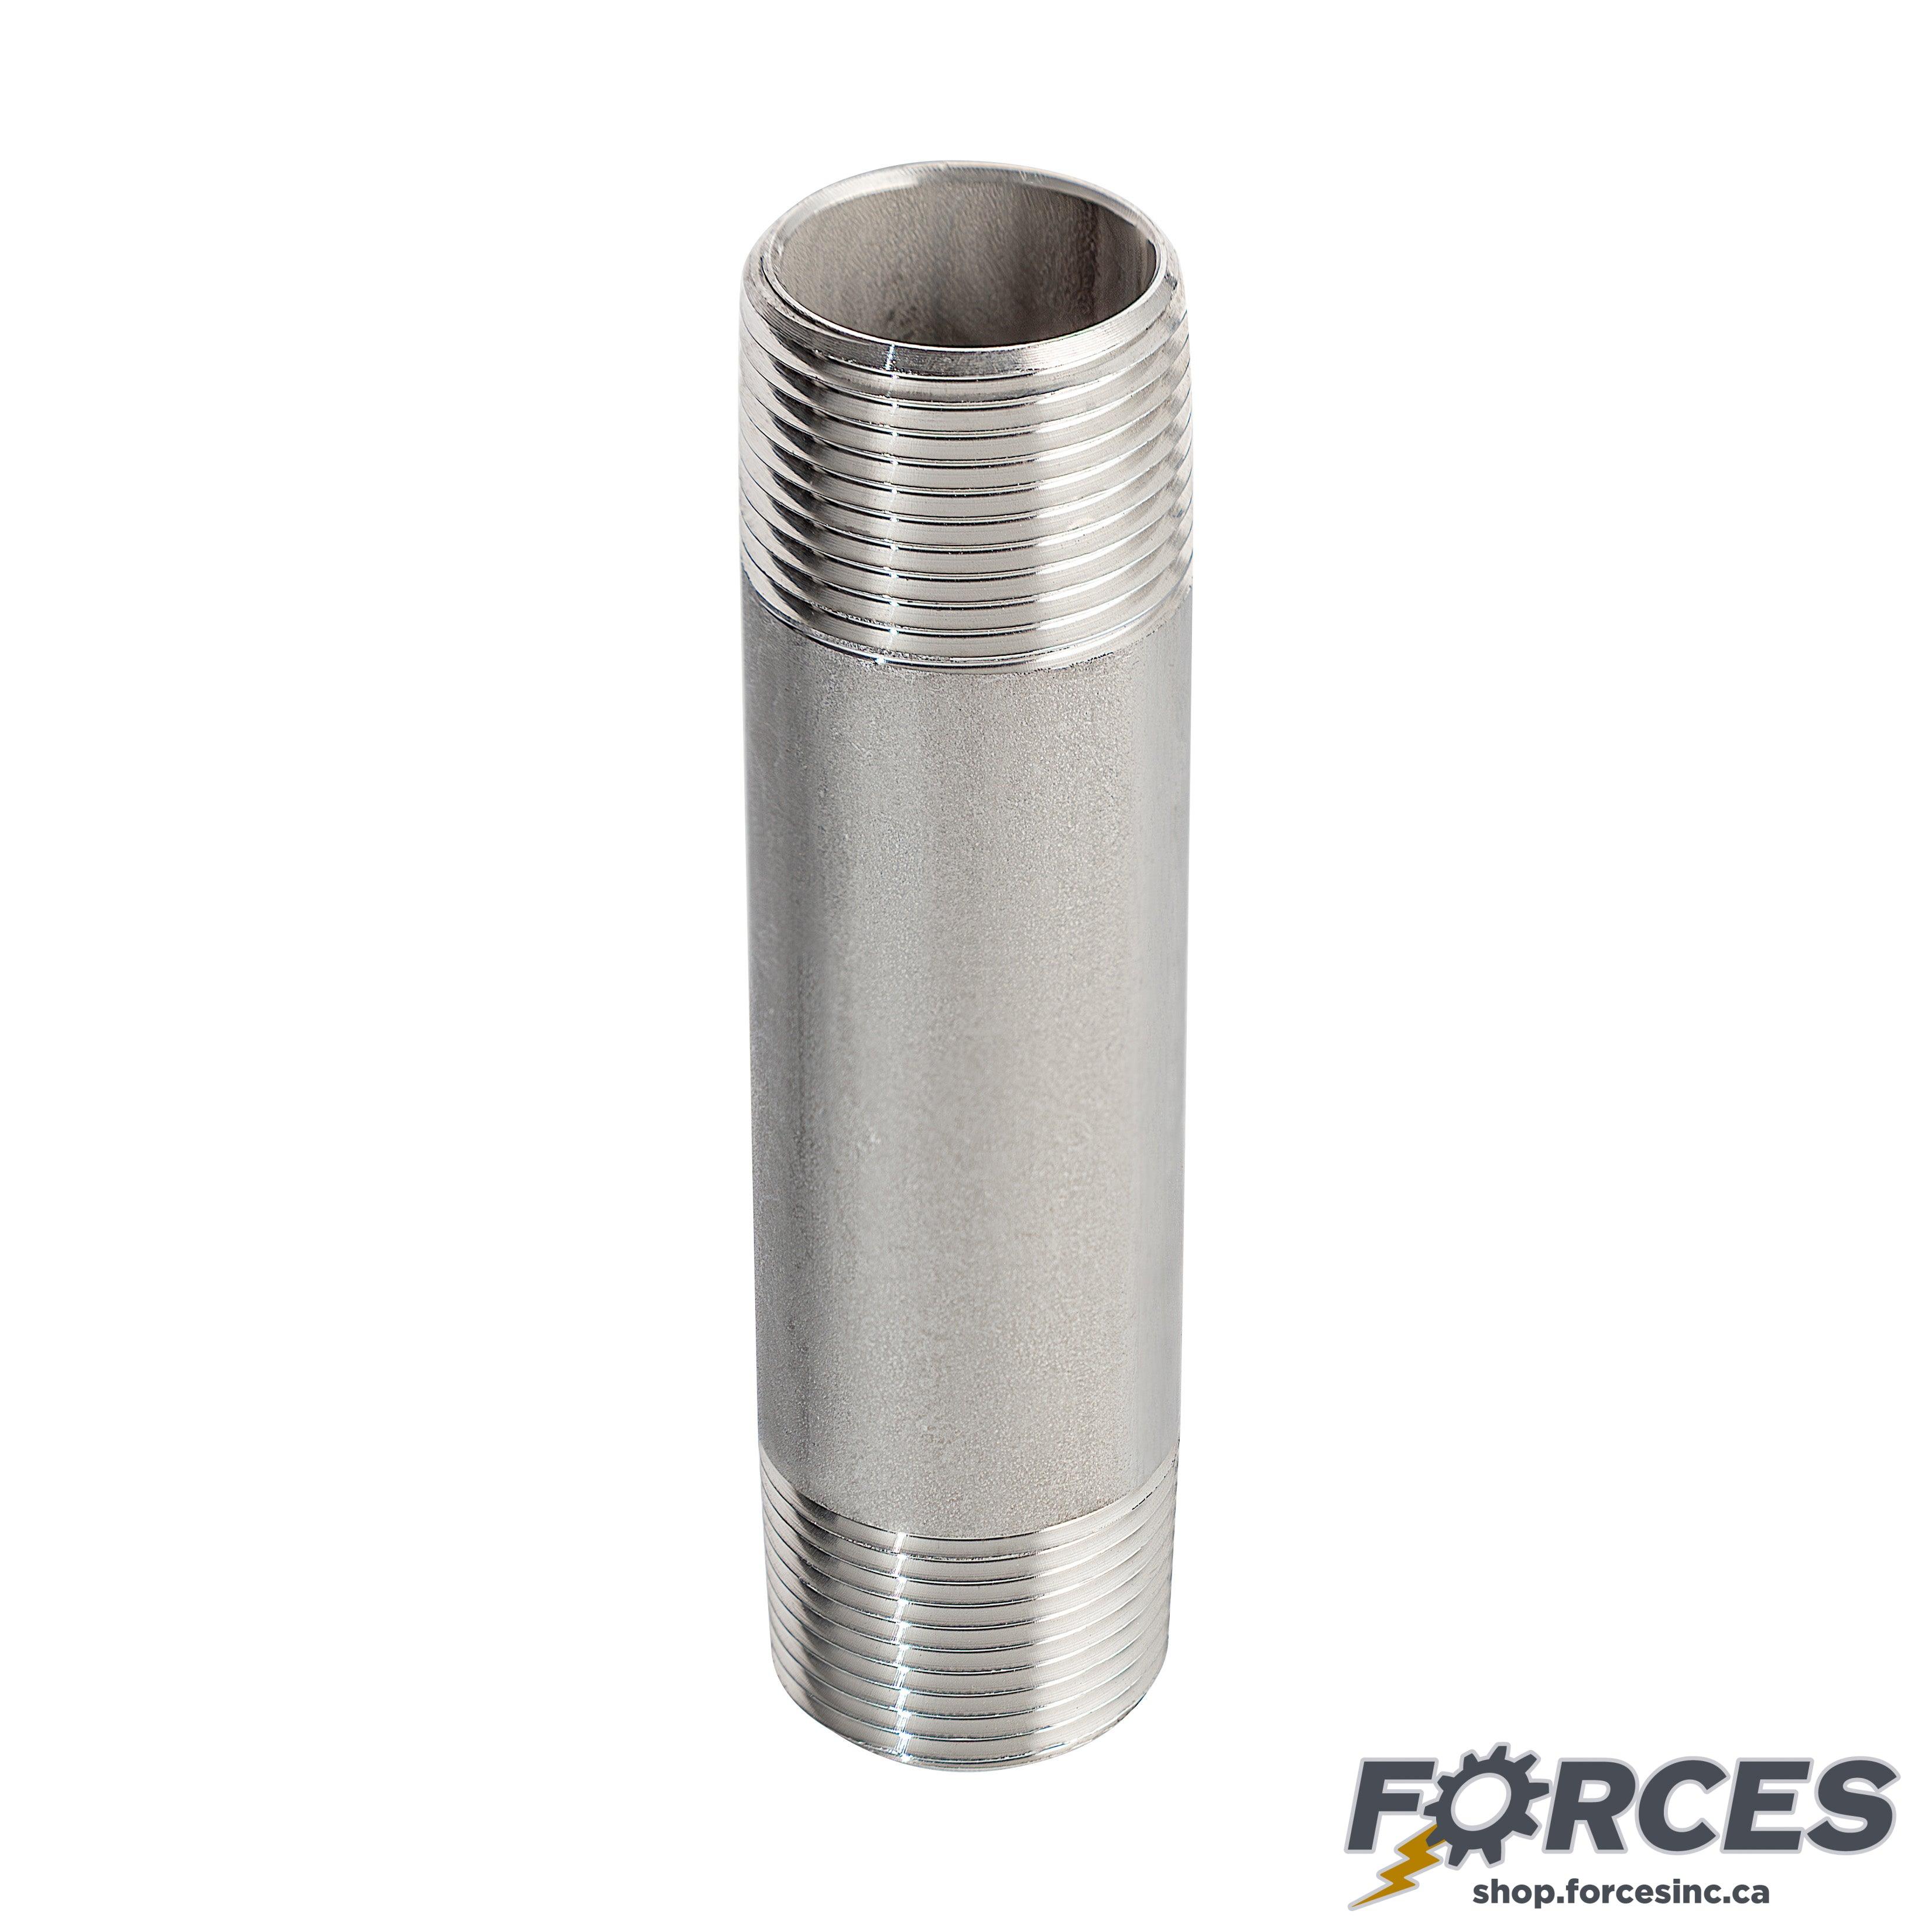 3/4" X 12" Long Nipple - Stainless Steel 316 - Forces Inc